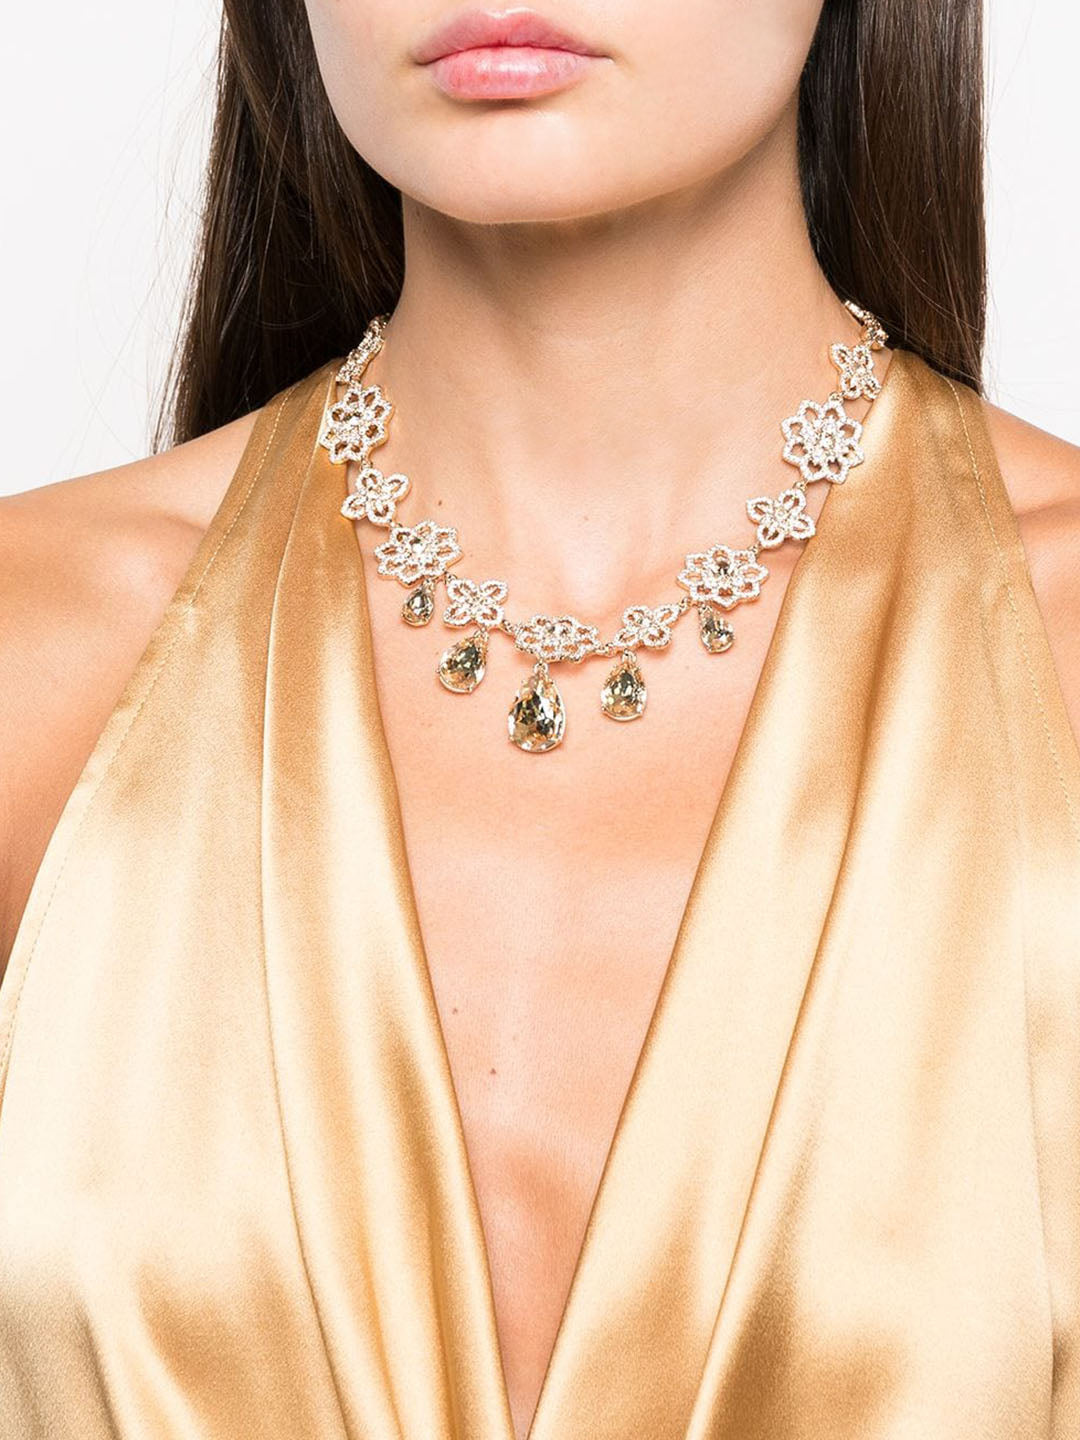 Lace Collar Necklace | Marchesa